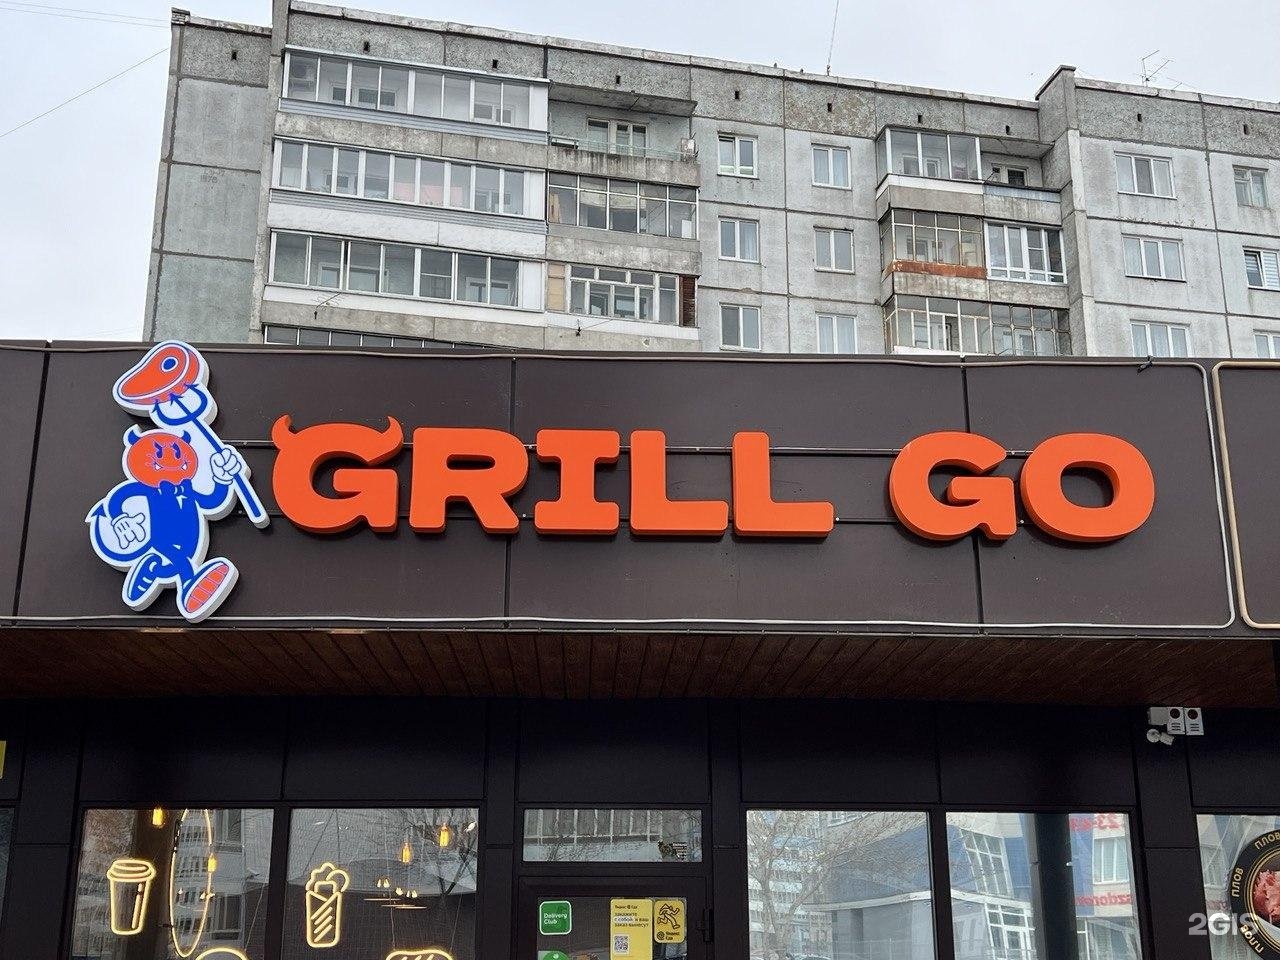 Grill go